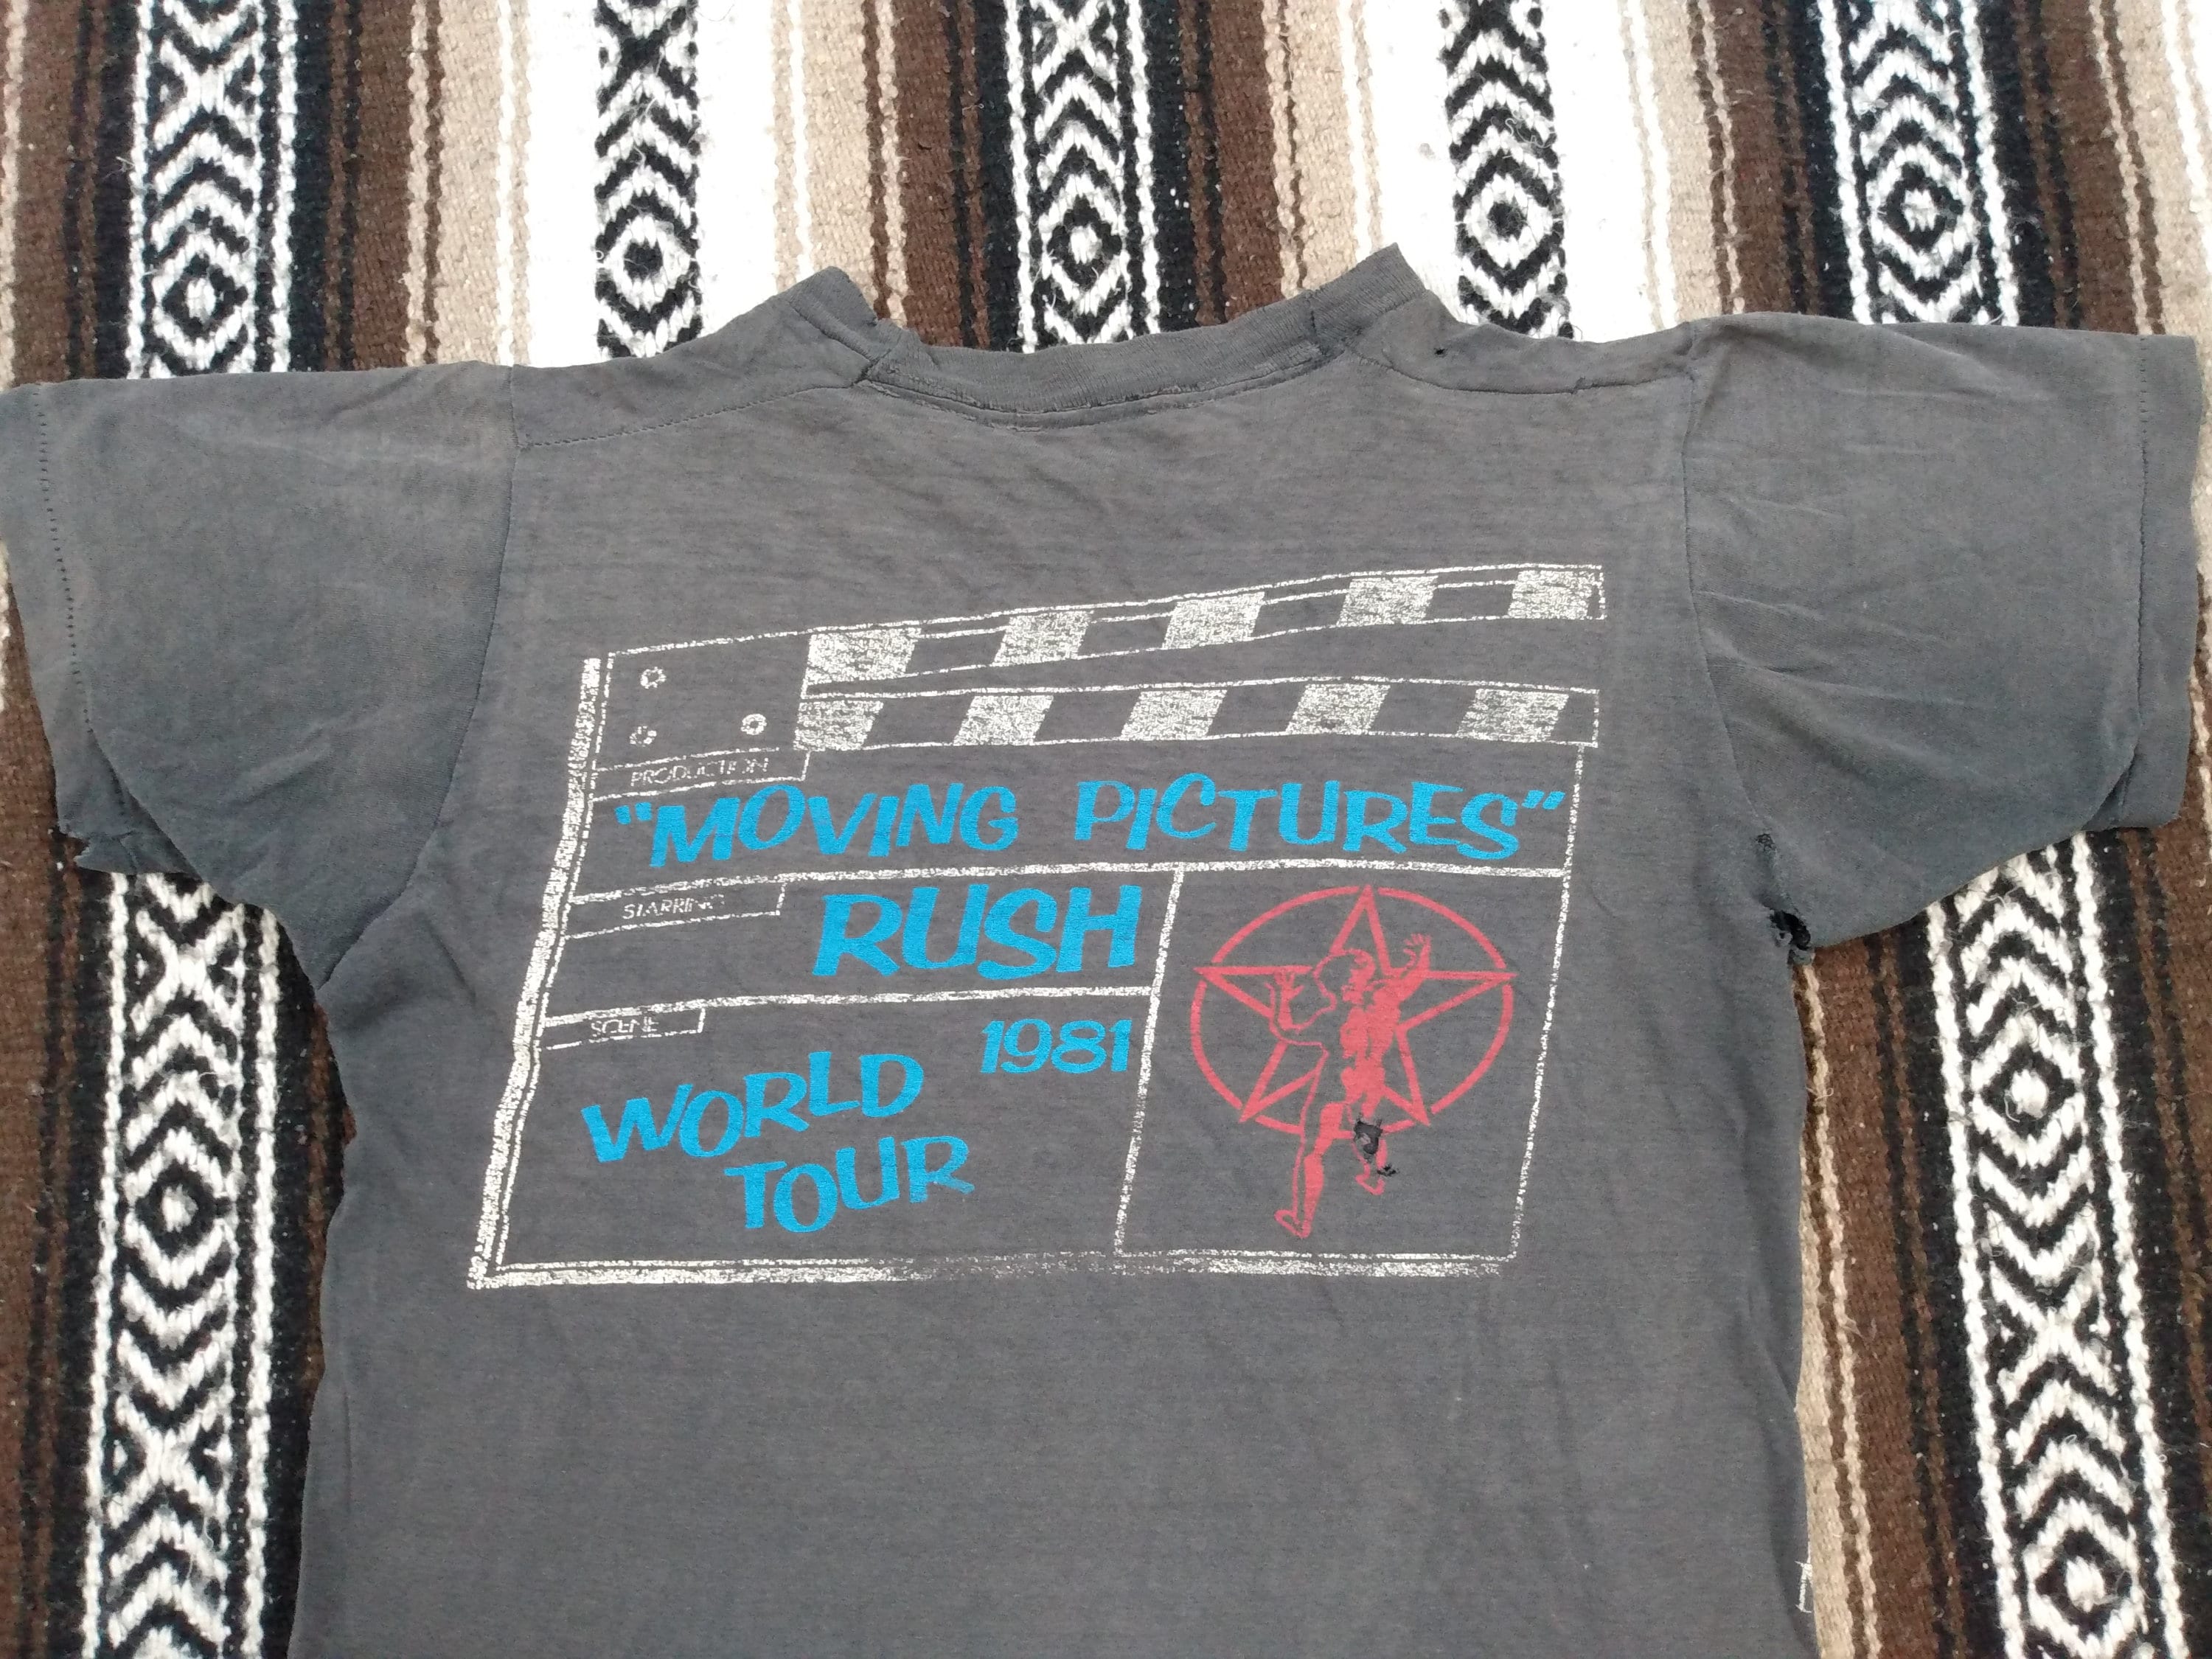 80s Worn S/M Cotton Concert Faded Size Moving Etsy Tee All T - 1981 and Shirt Stitch Band Pictures Prog Sun Soft Vintage RUSH Thin Rock Single Tour